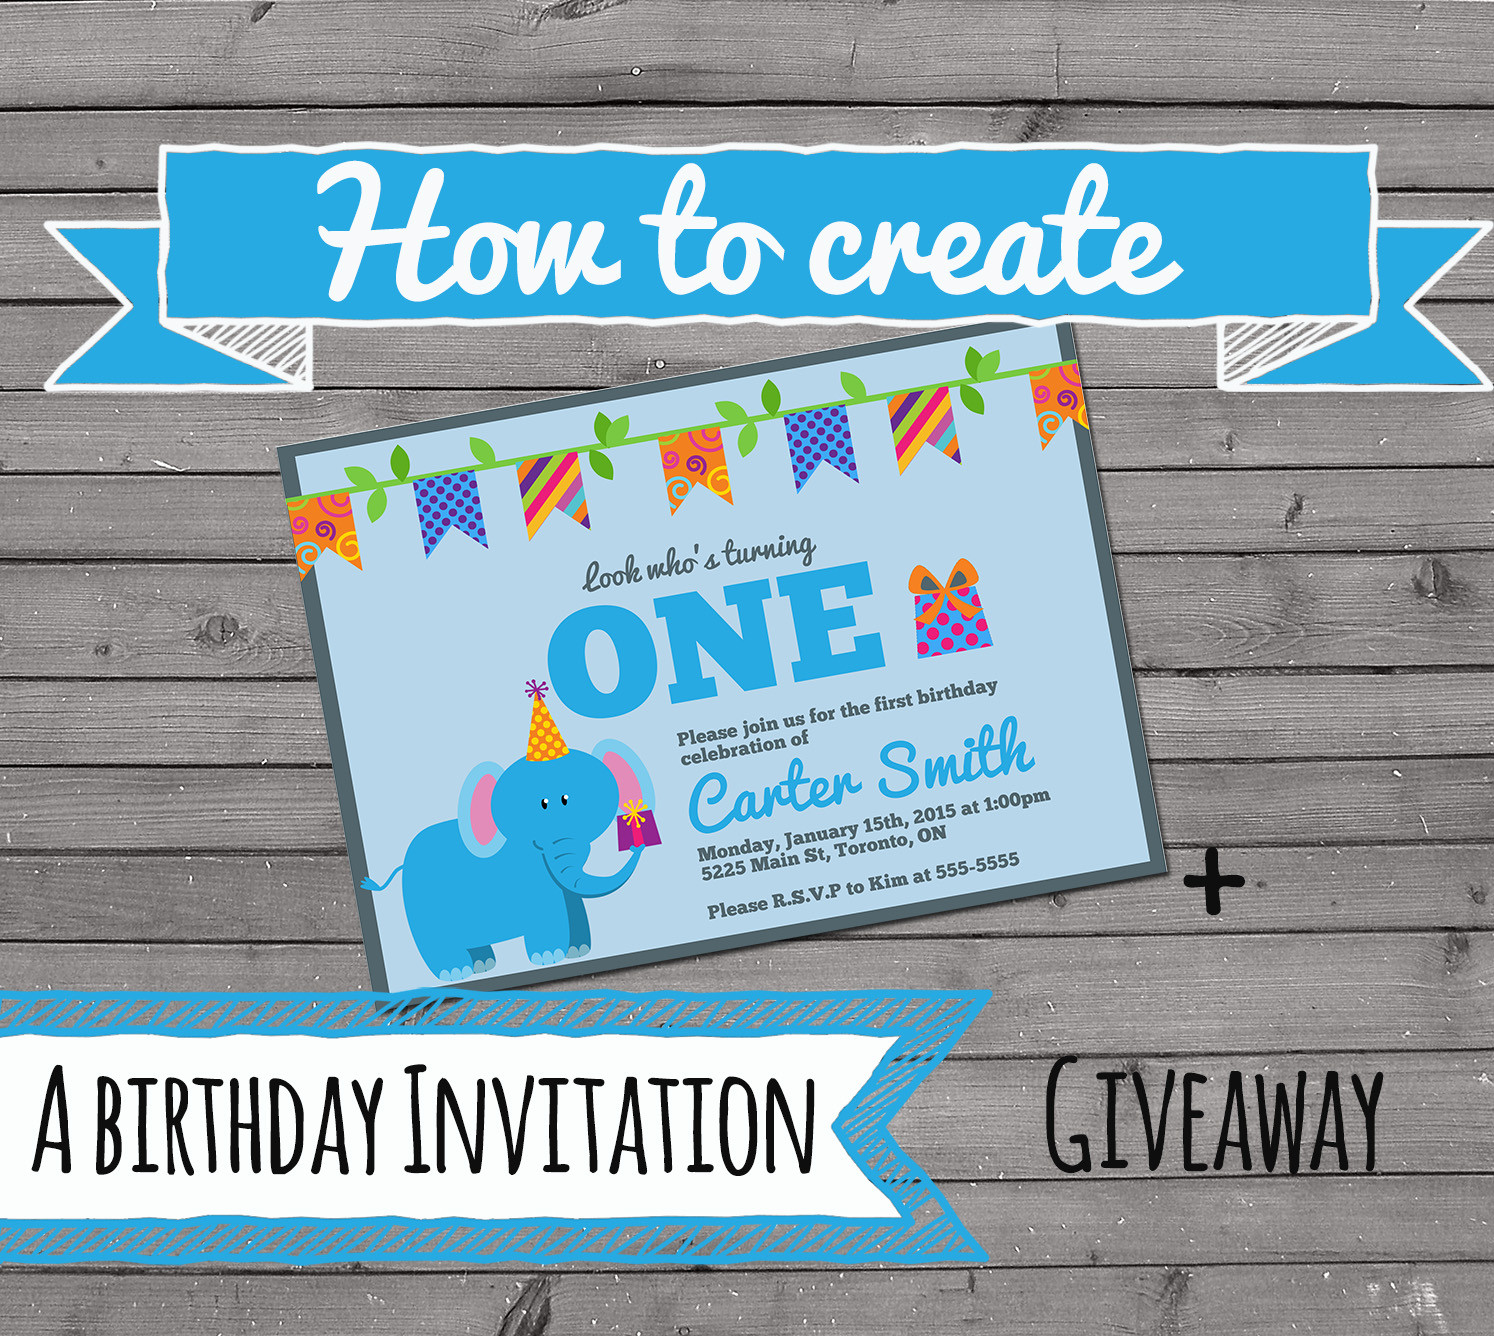 Make A Birthday Invitation
 How to Create an Invitation The Best Ideas for Kids